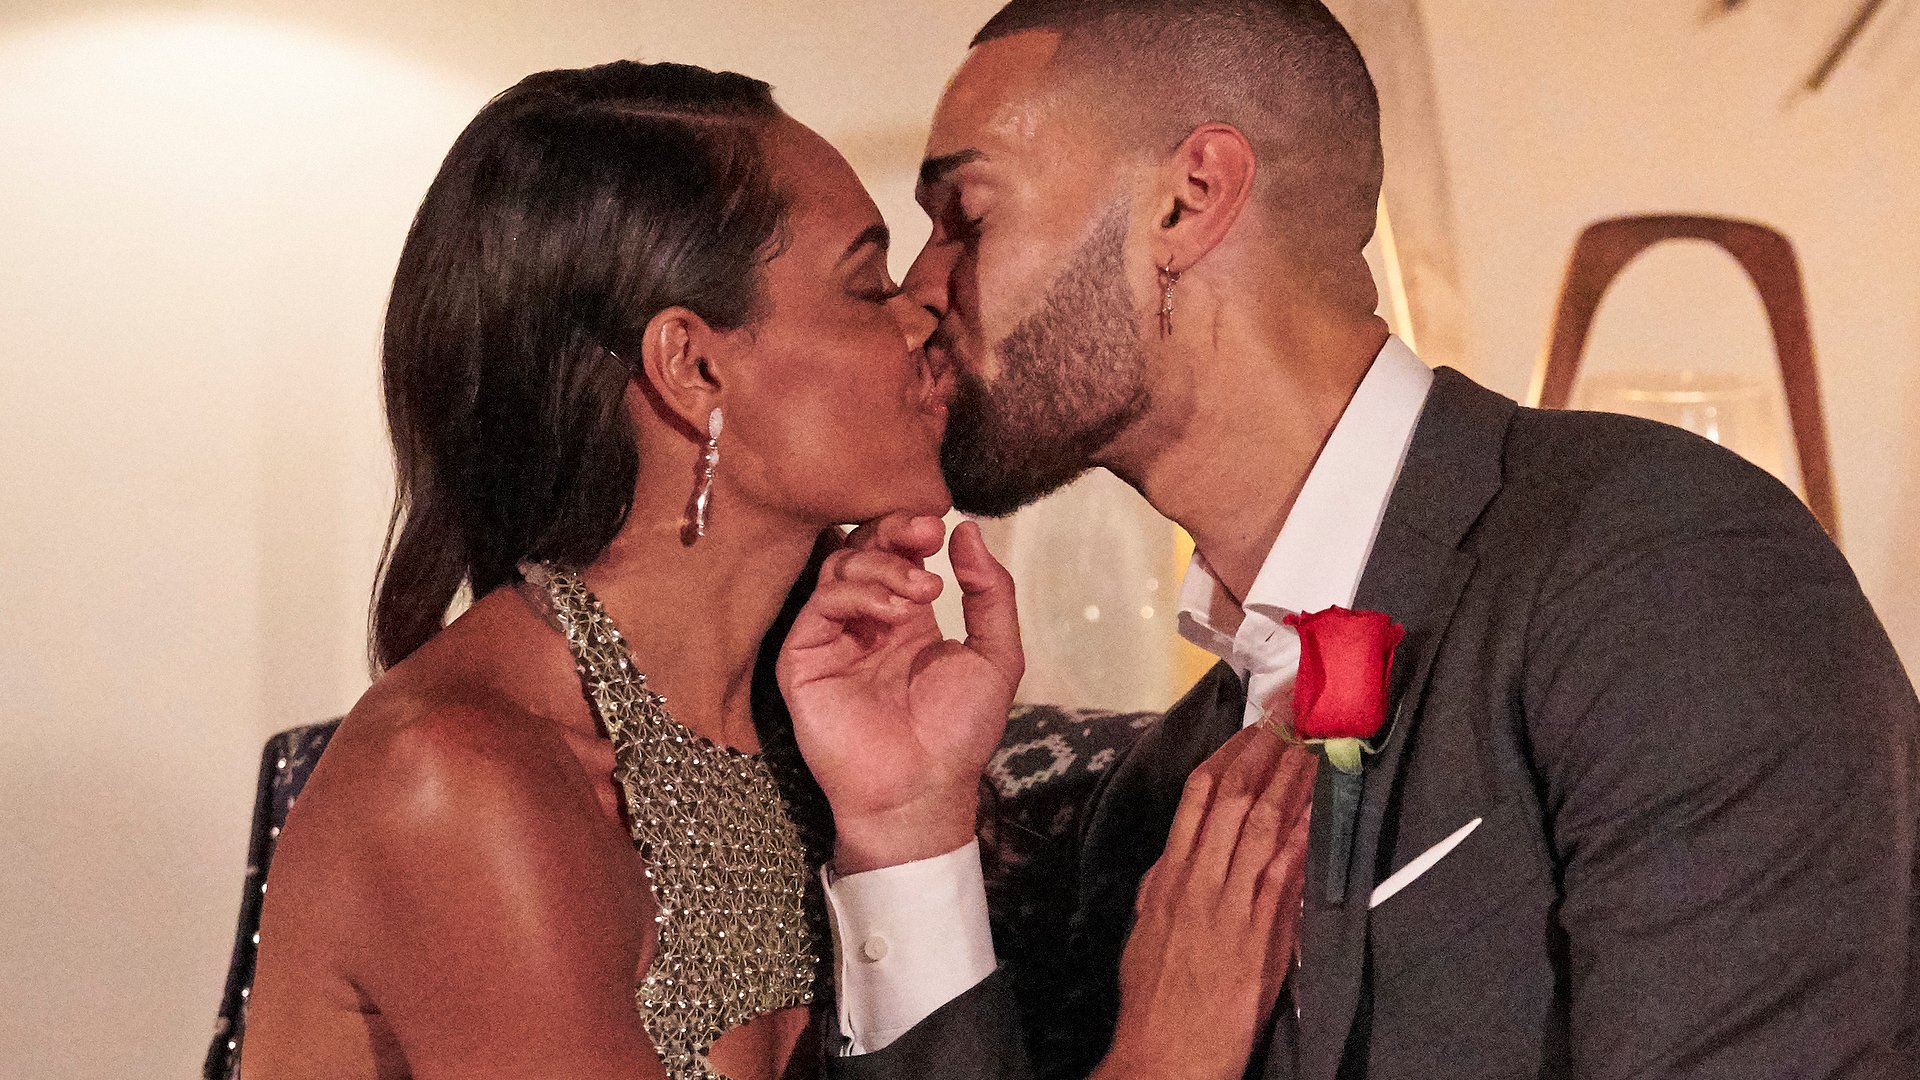 Nayte Olukoya kissing Michelle Young after he wins the first impression rose in ‘The Bachelorette’ Season 18 premiere